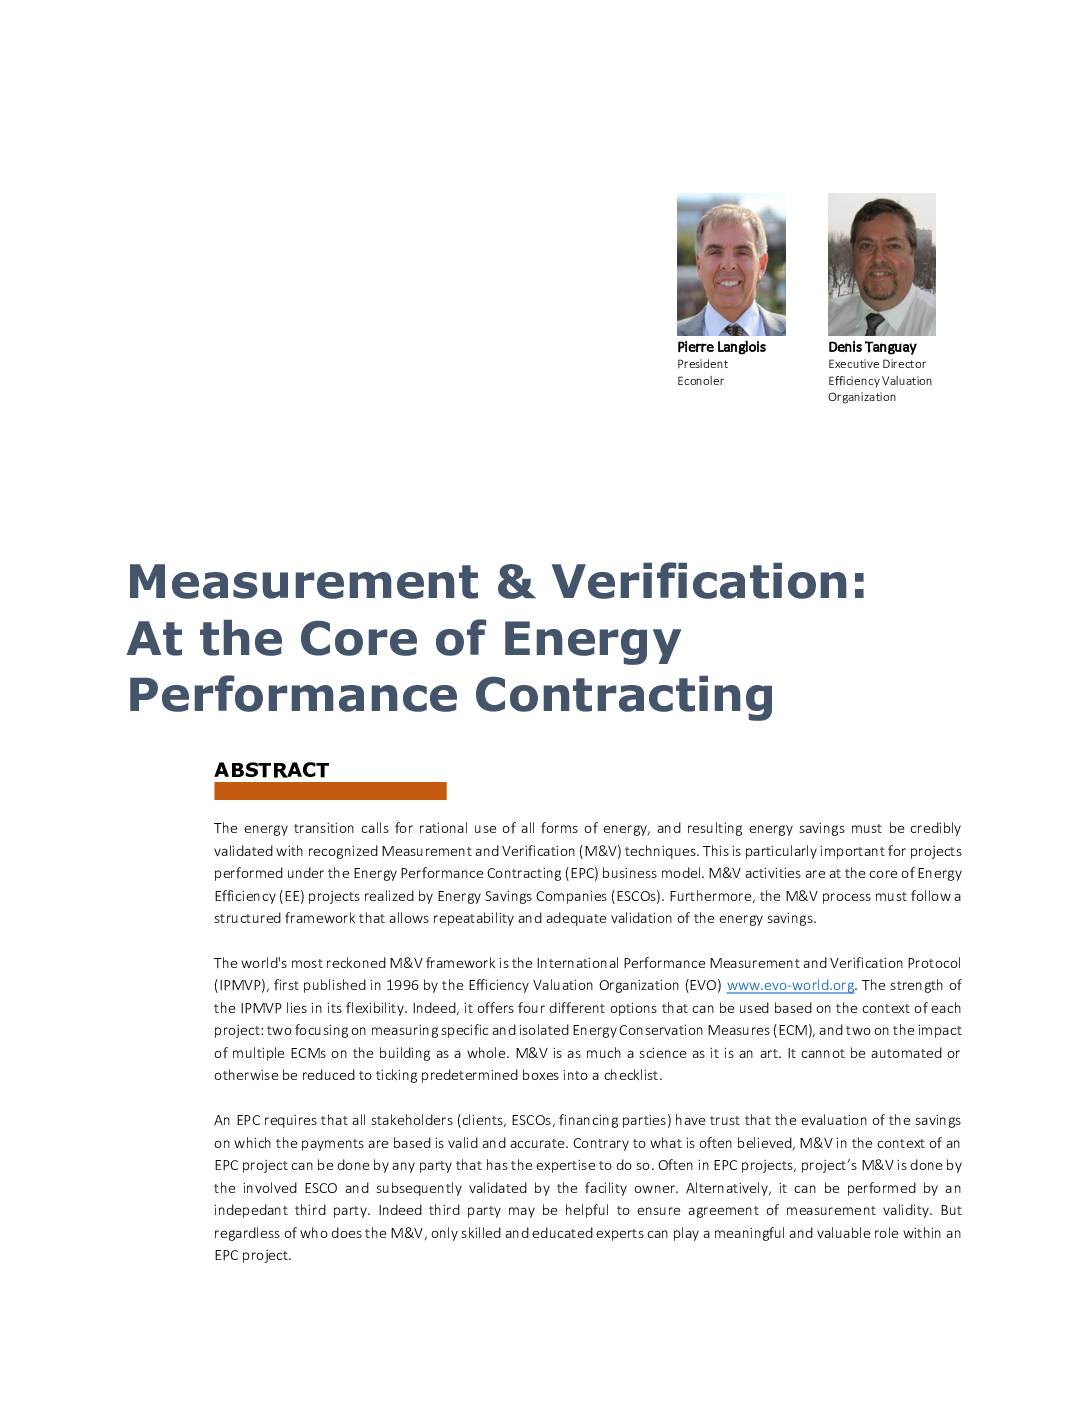 Measurement & Verification: At the Core of Energy Performance Contracting